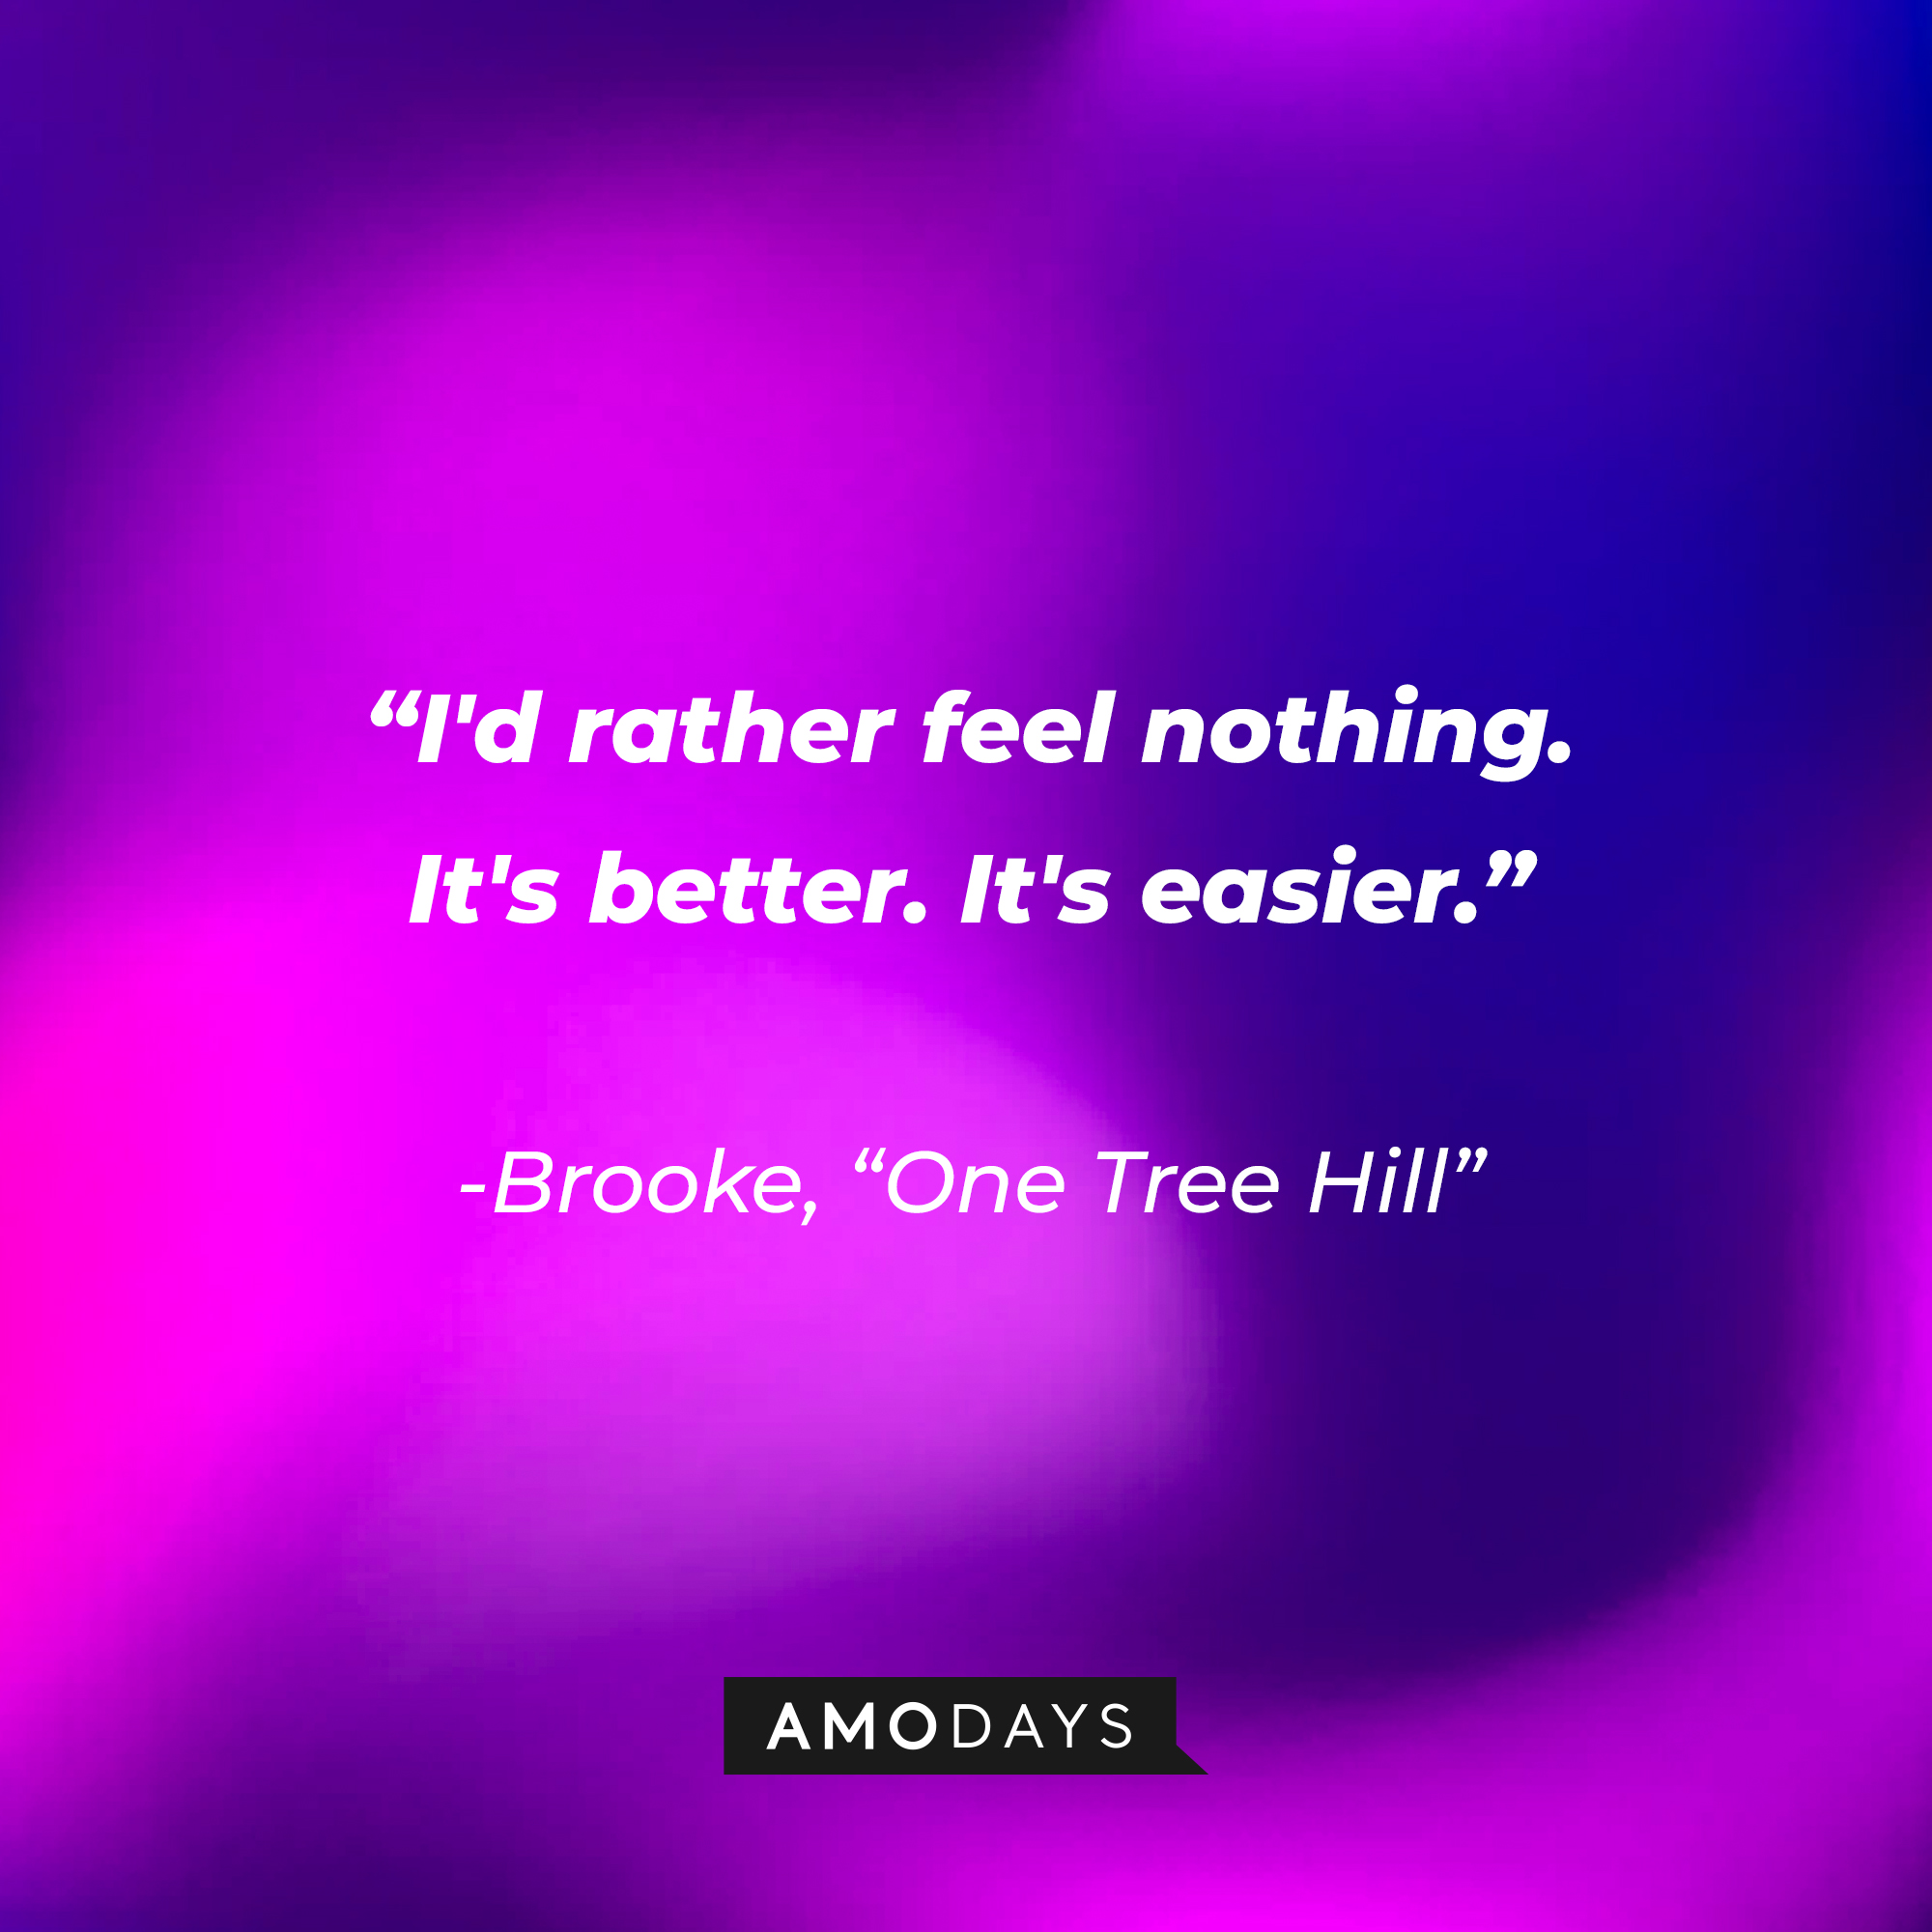 Brooke’s quote from “One Tree Hill”: “I'd rather feel nothing. It's better. It's easier.” | Source: AmoDays